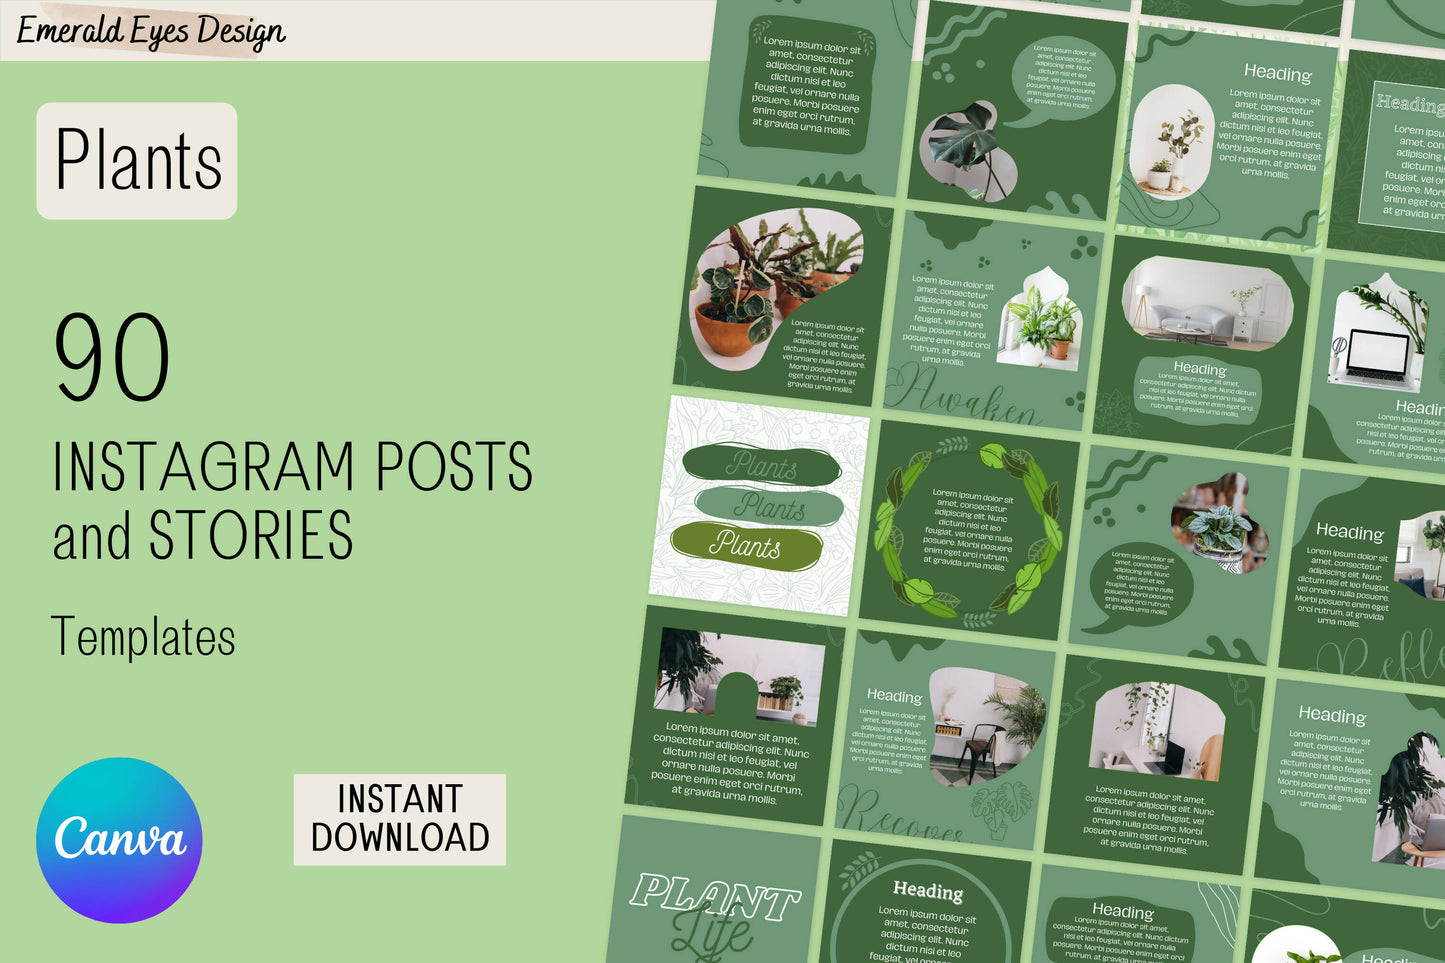 90 Canva Green Plant Themed Instagram Feed & Stories Templates Houseplants Green